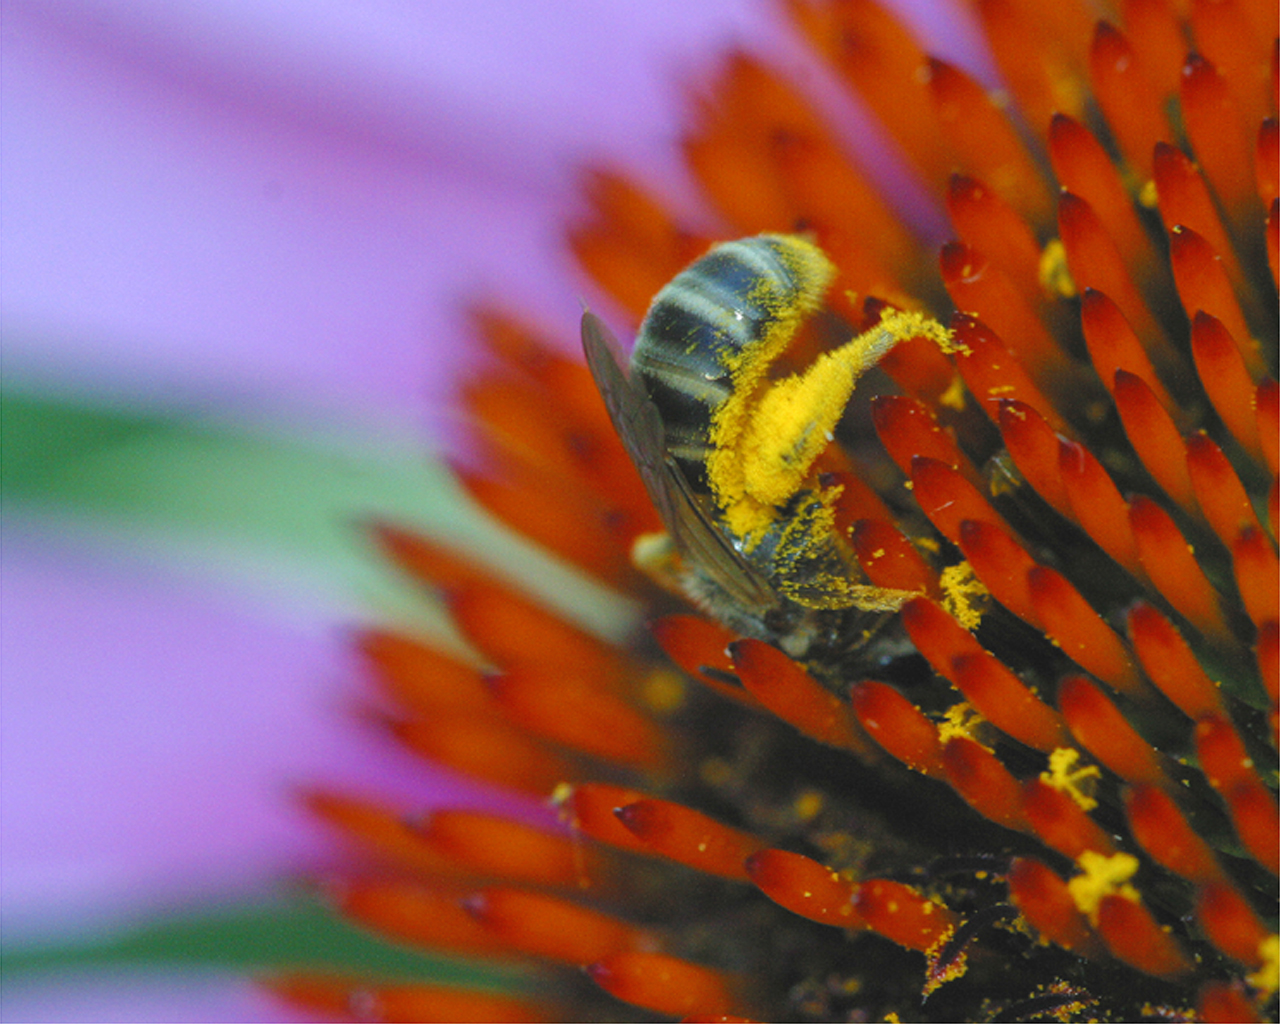 Bees, with their many body hairs, are excellent pollinators